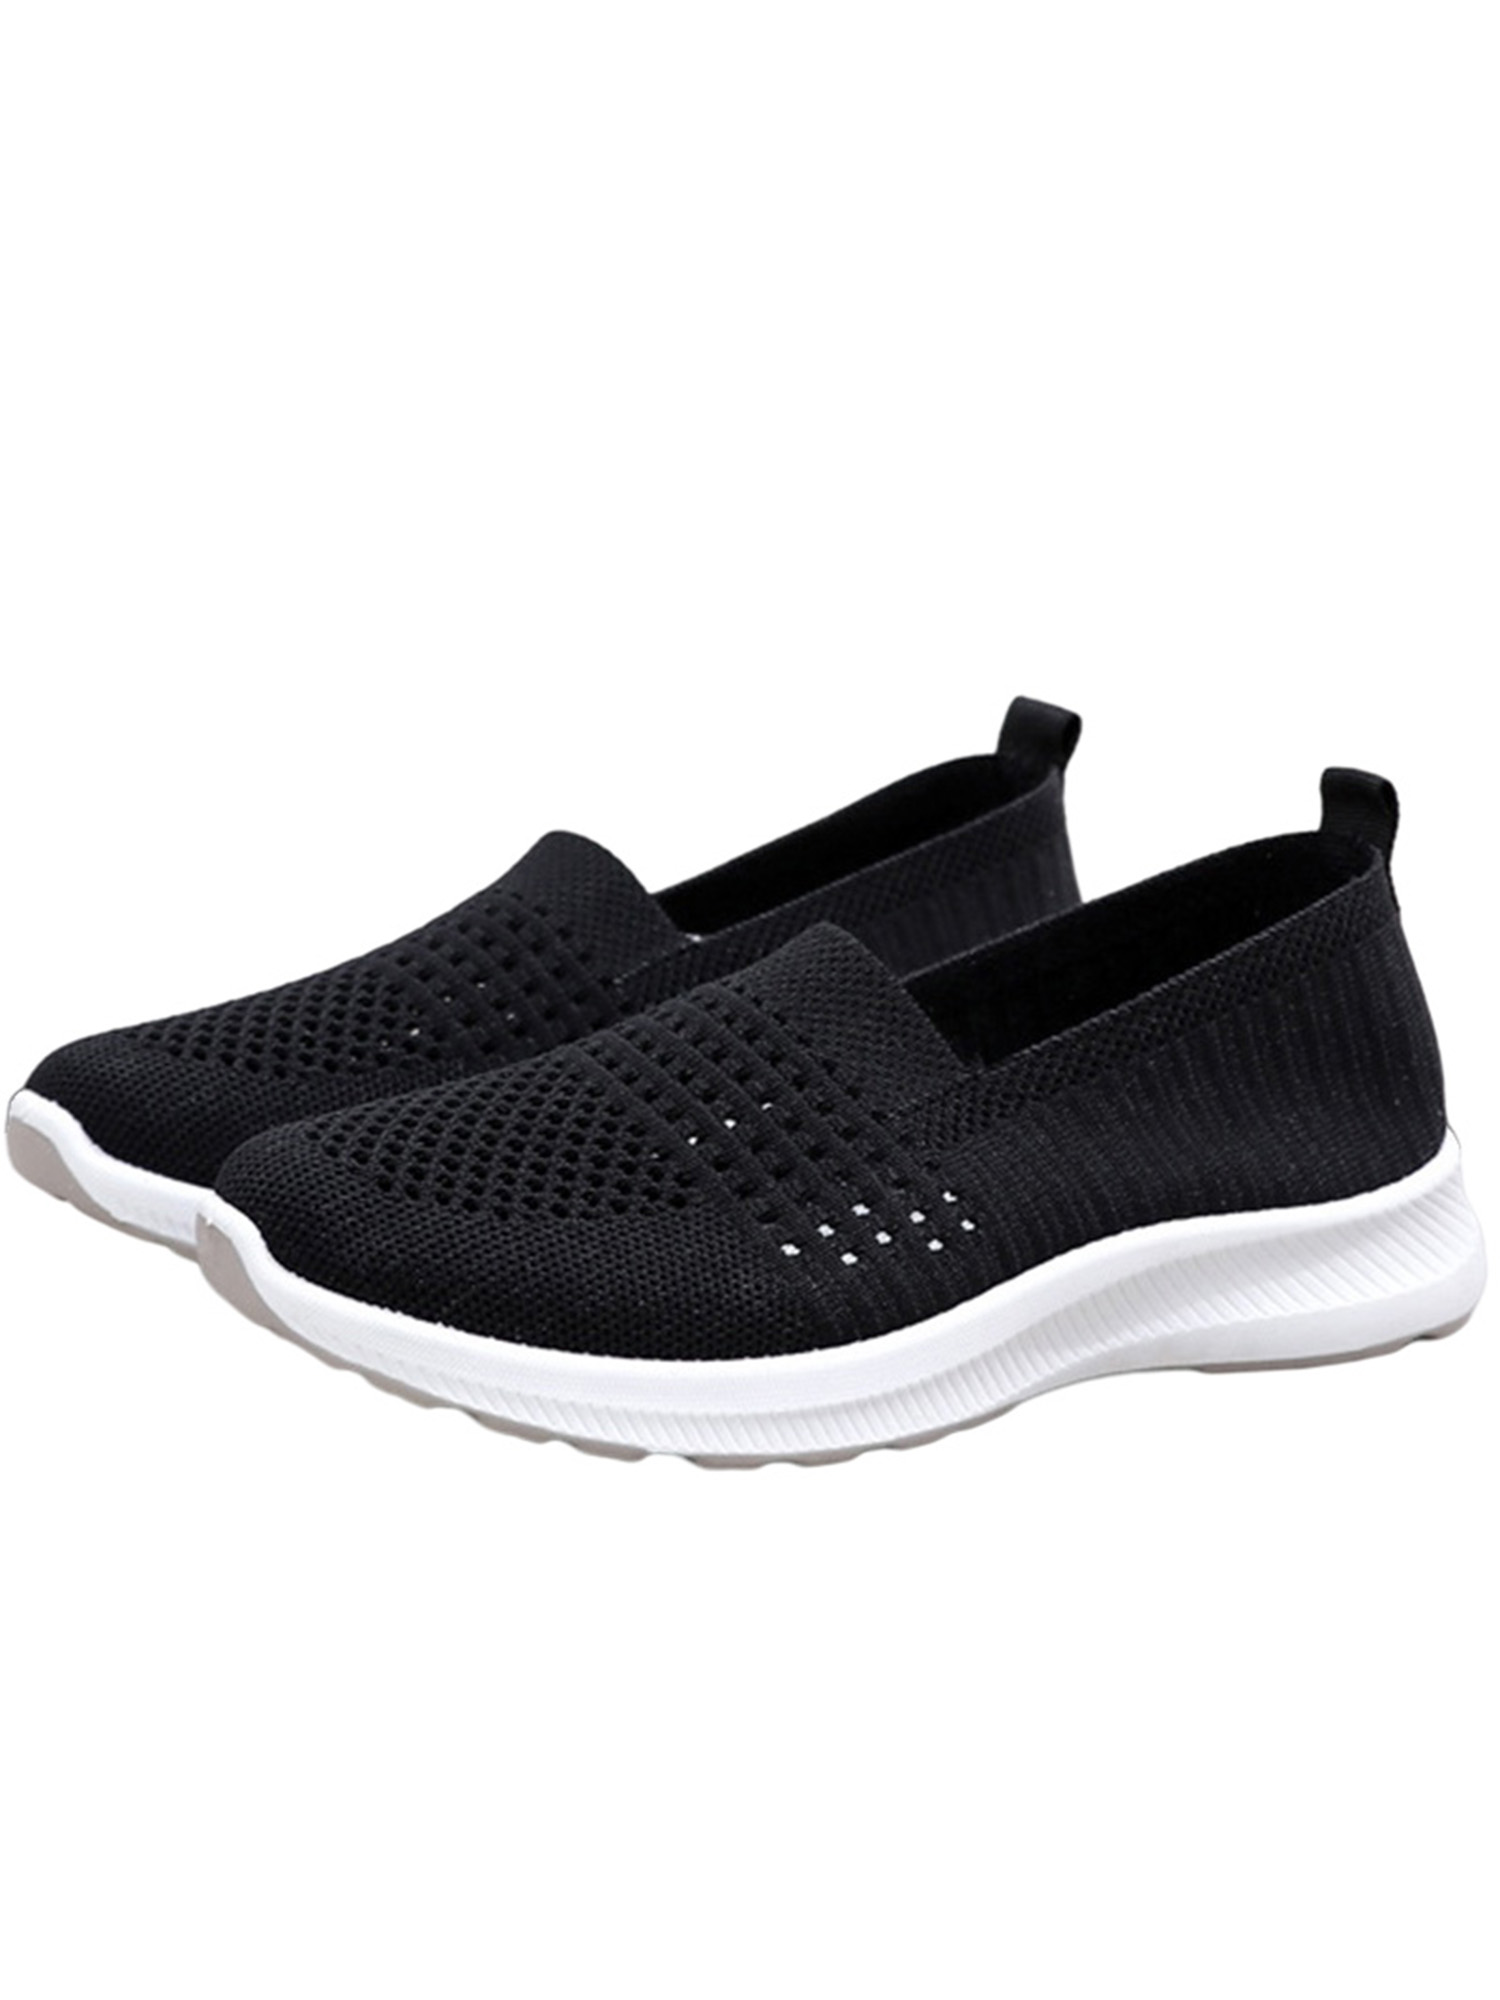 Avamo Men's Sneakers Non Slip Shoes Ultra Lightweight Breathable Athletic Running Walking Gym Shoes - image 1 of 2